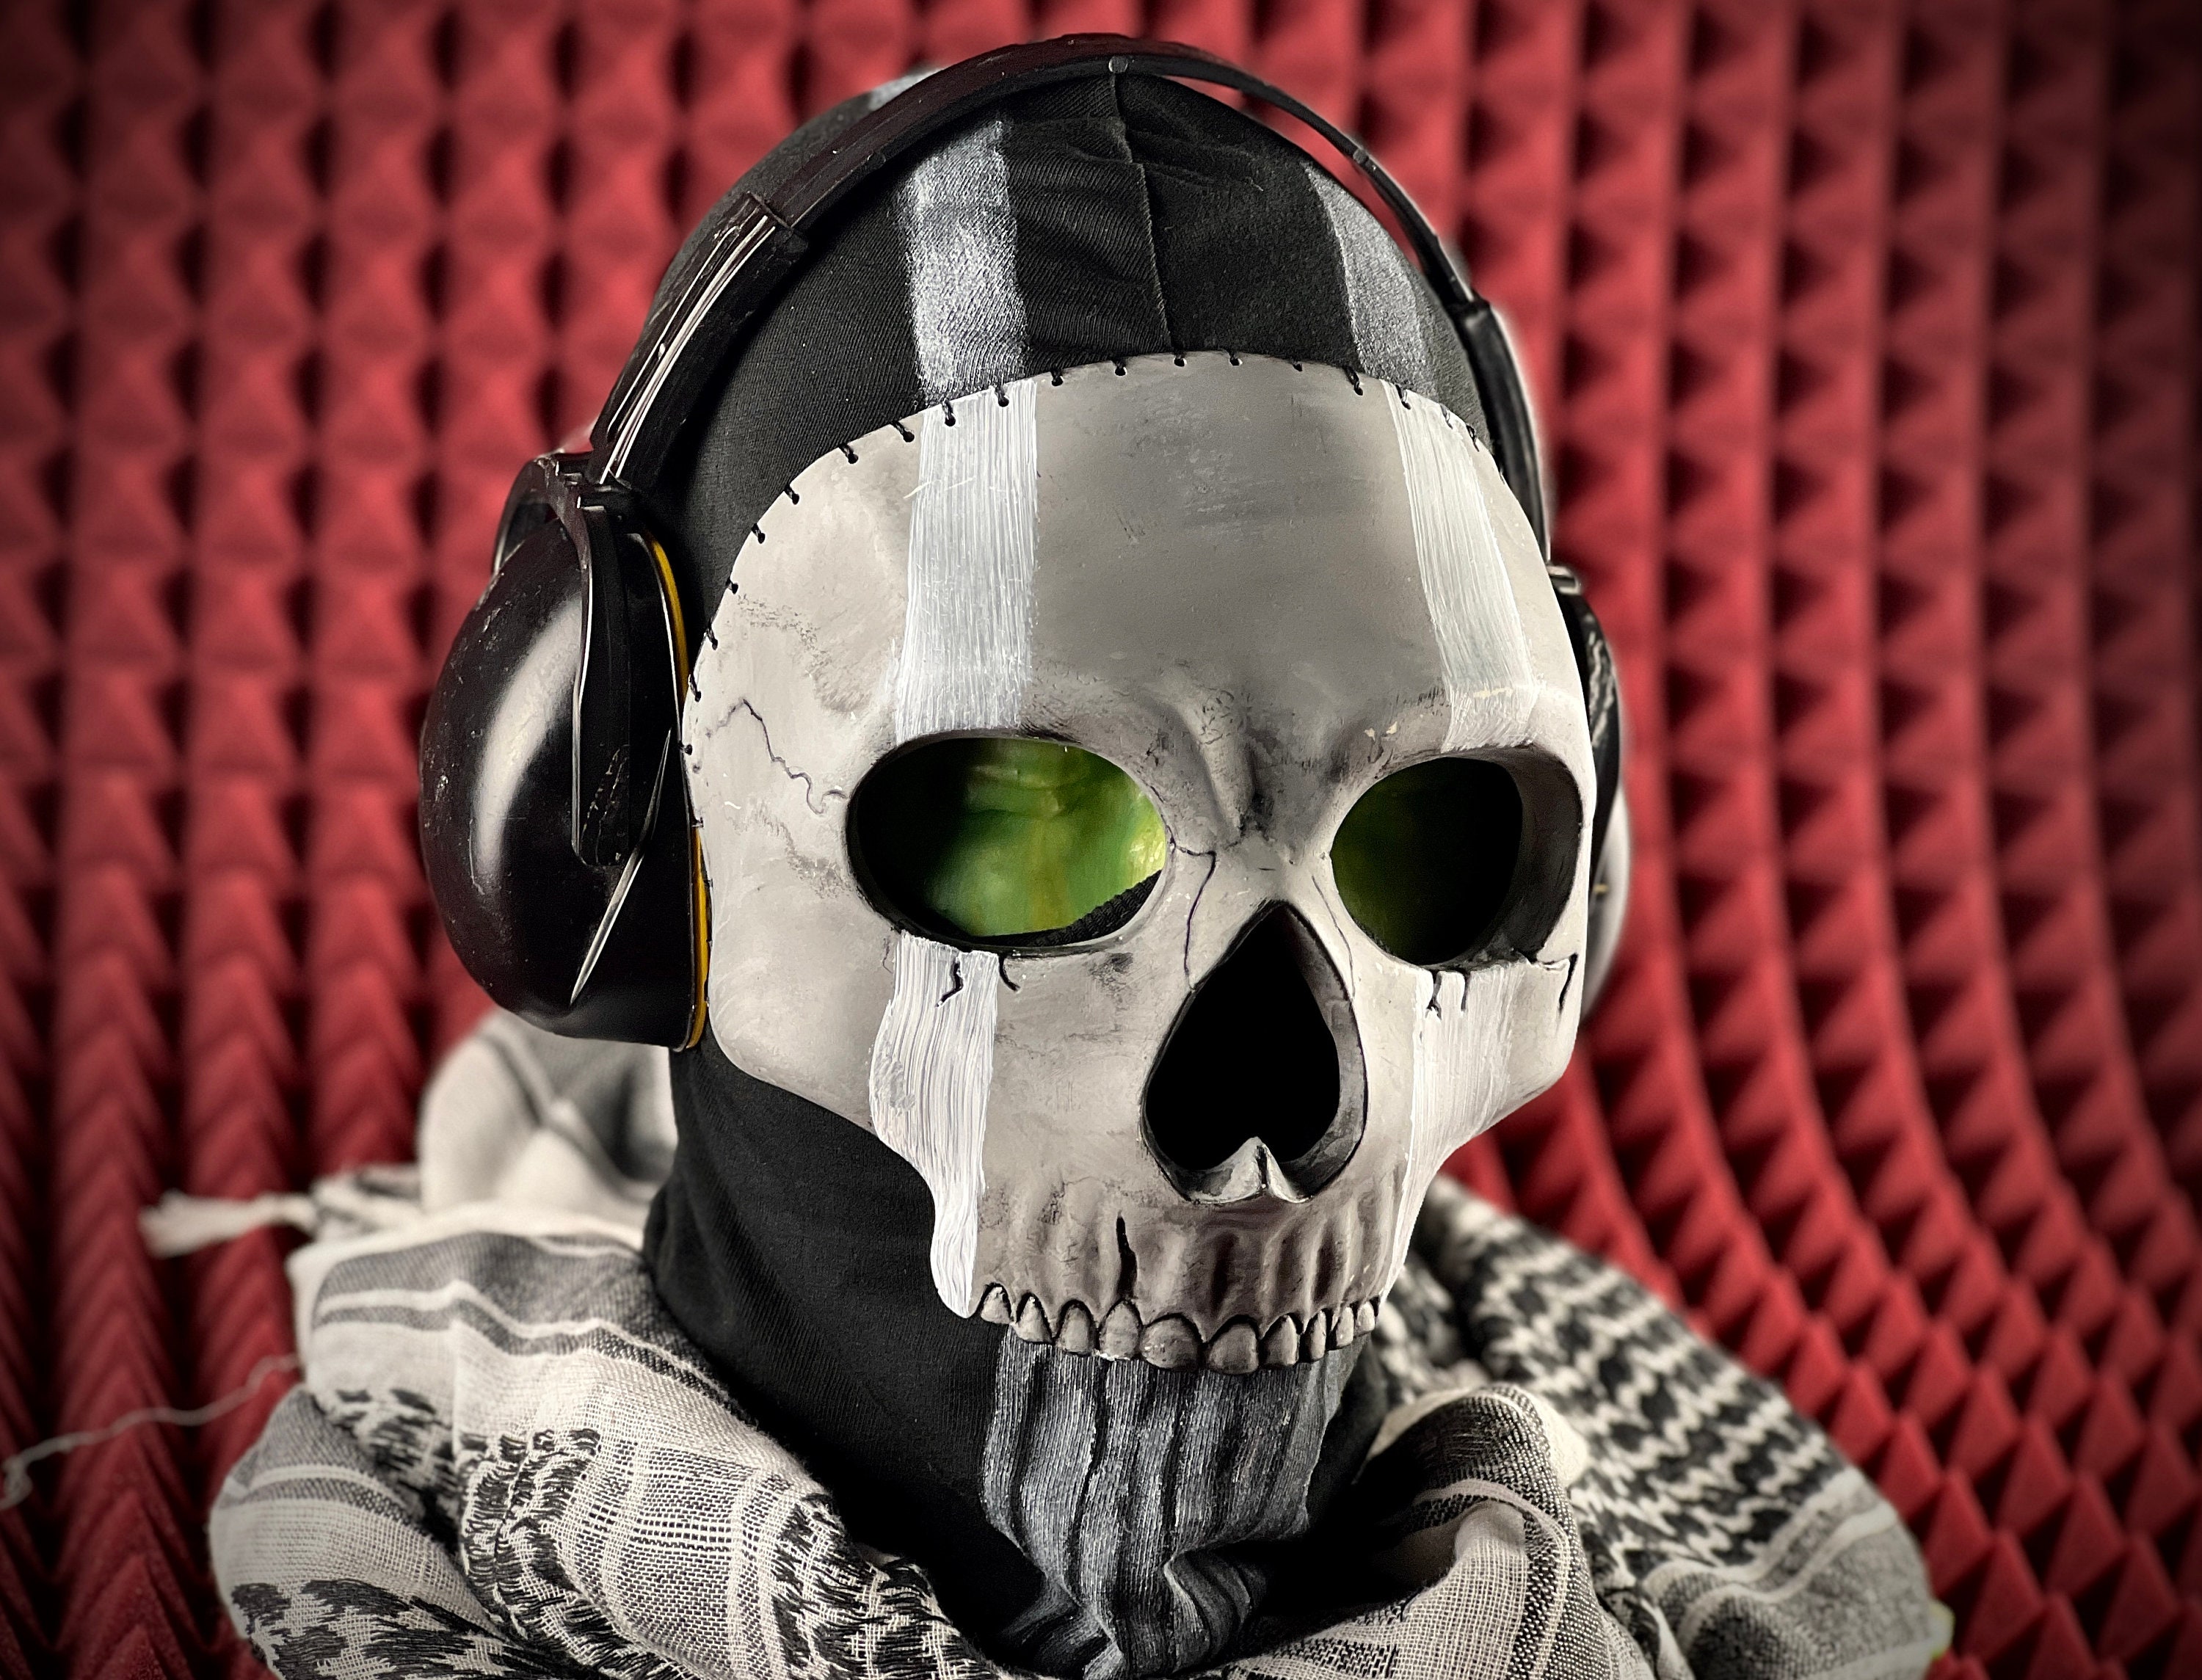 Ghost mask / Airsoft mask / Skull mask